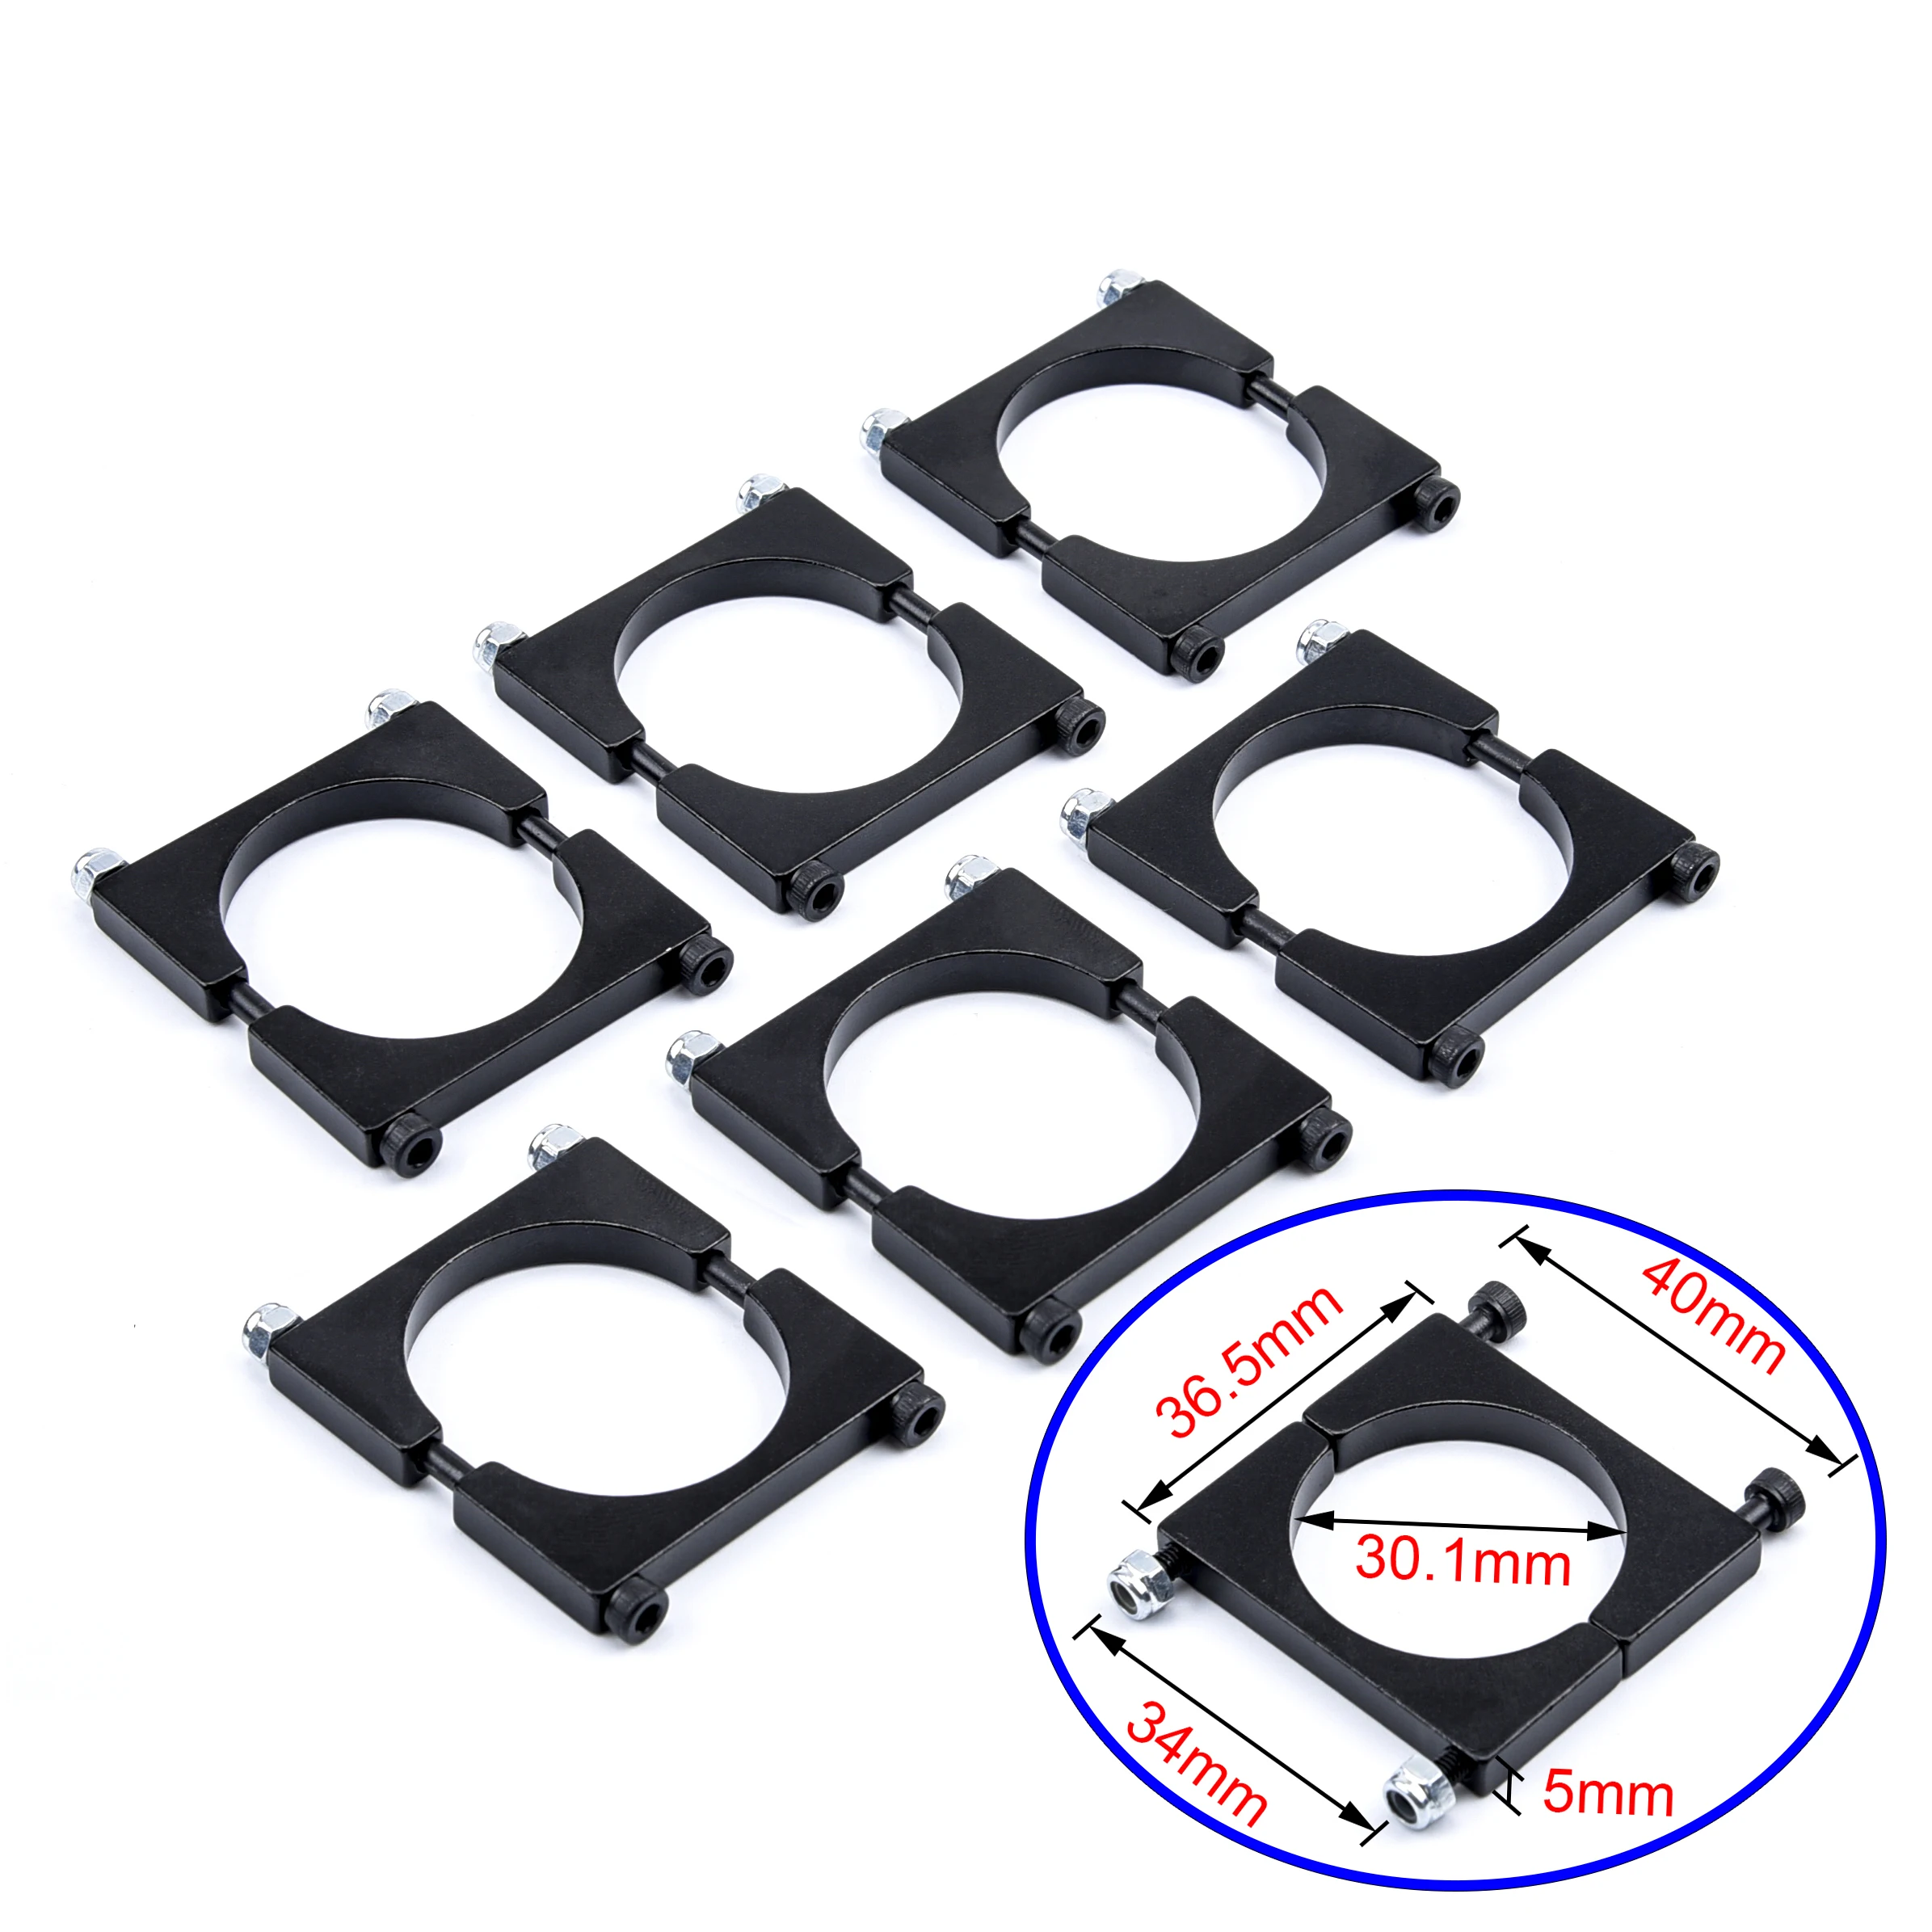 Aluminum Alloy Pipe Clamp Clip Tube Clamp Connector for 30mm Carbon Fiber Tube Pipe RC Plant UAV Quadcopter Frame